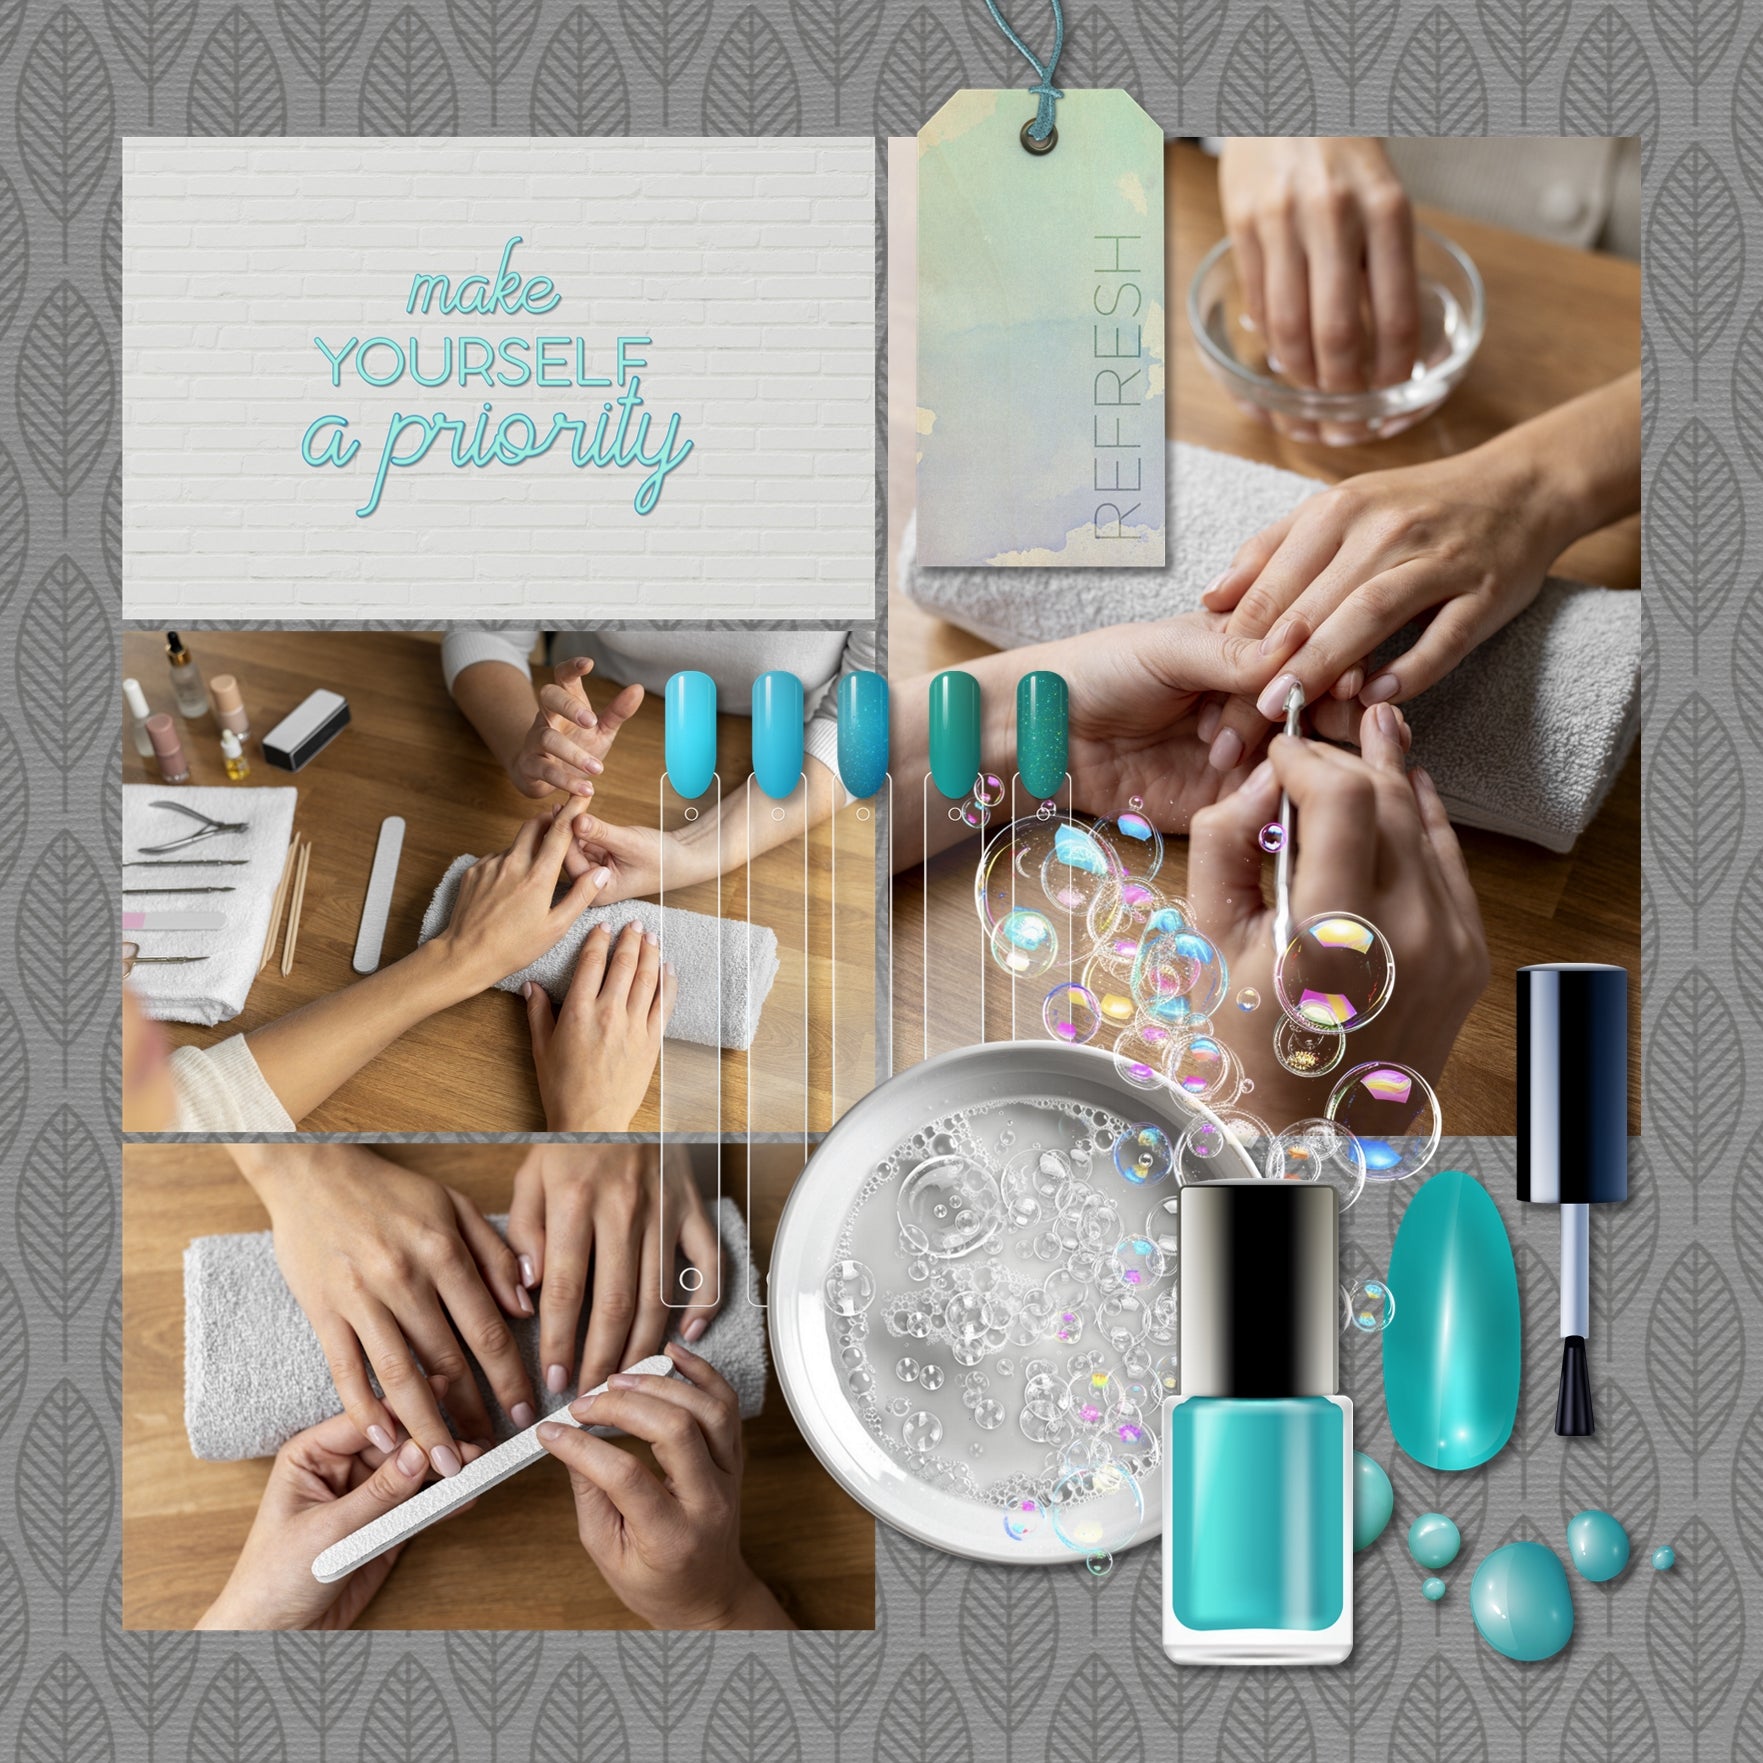 Document your latest trip to the hair salon, spa, and makeup studio with these realistic digital scrapbooking watercolor tags by Lucky Girl Creative digital art. Words on tags include relax, shine, queen, hello, pretty, sparkle, happy, love, refresh, memories, celebrate, and self care.